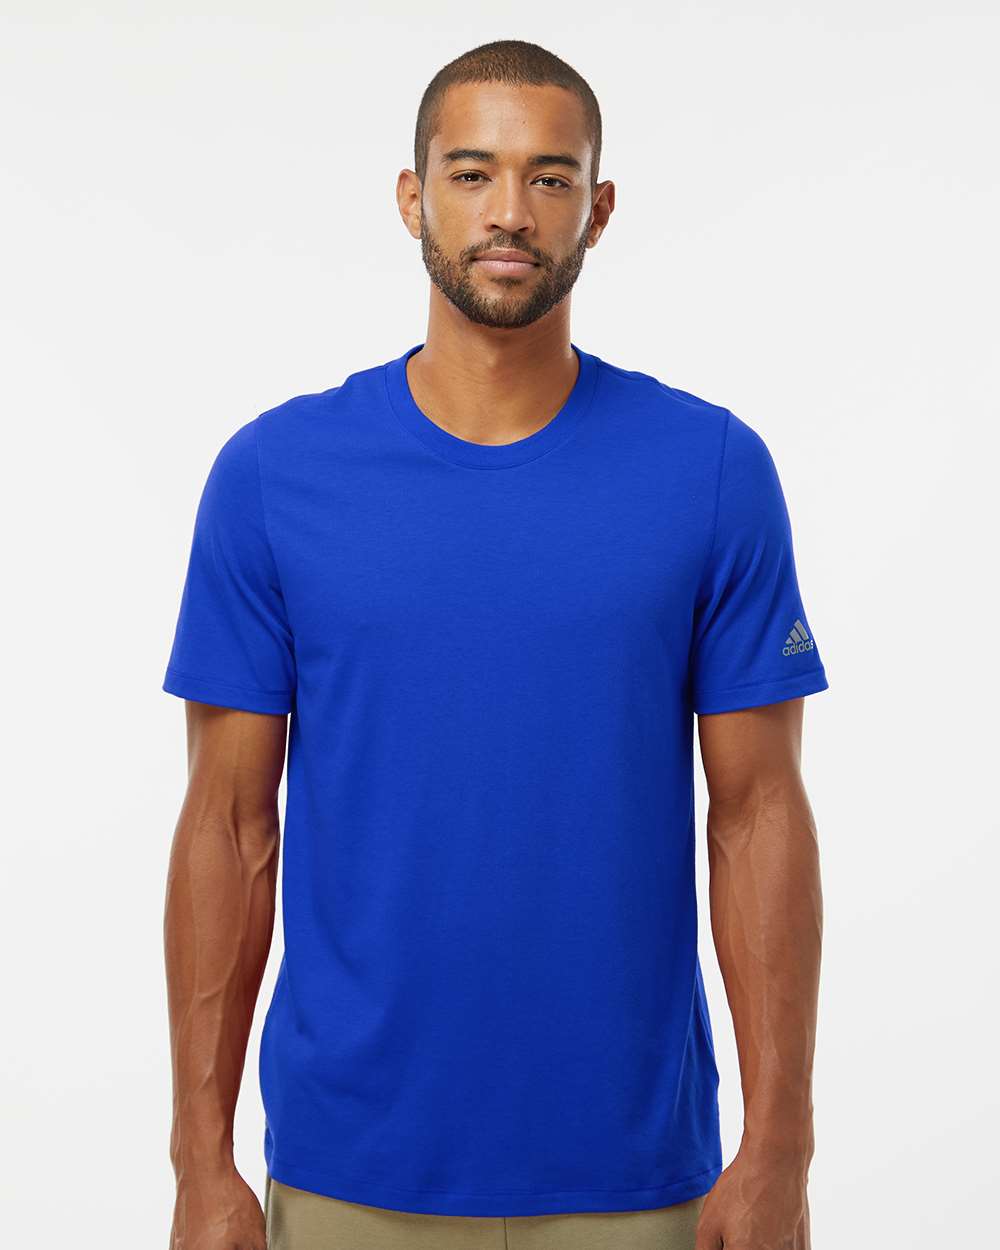 Adidas A556 Blended T-Shirt #colormdl_Collegiate Royal